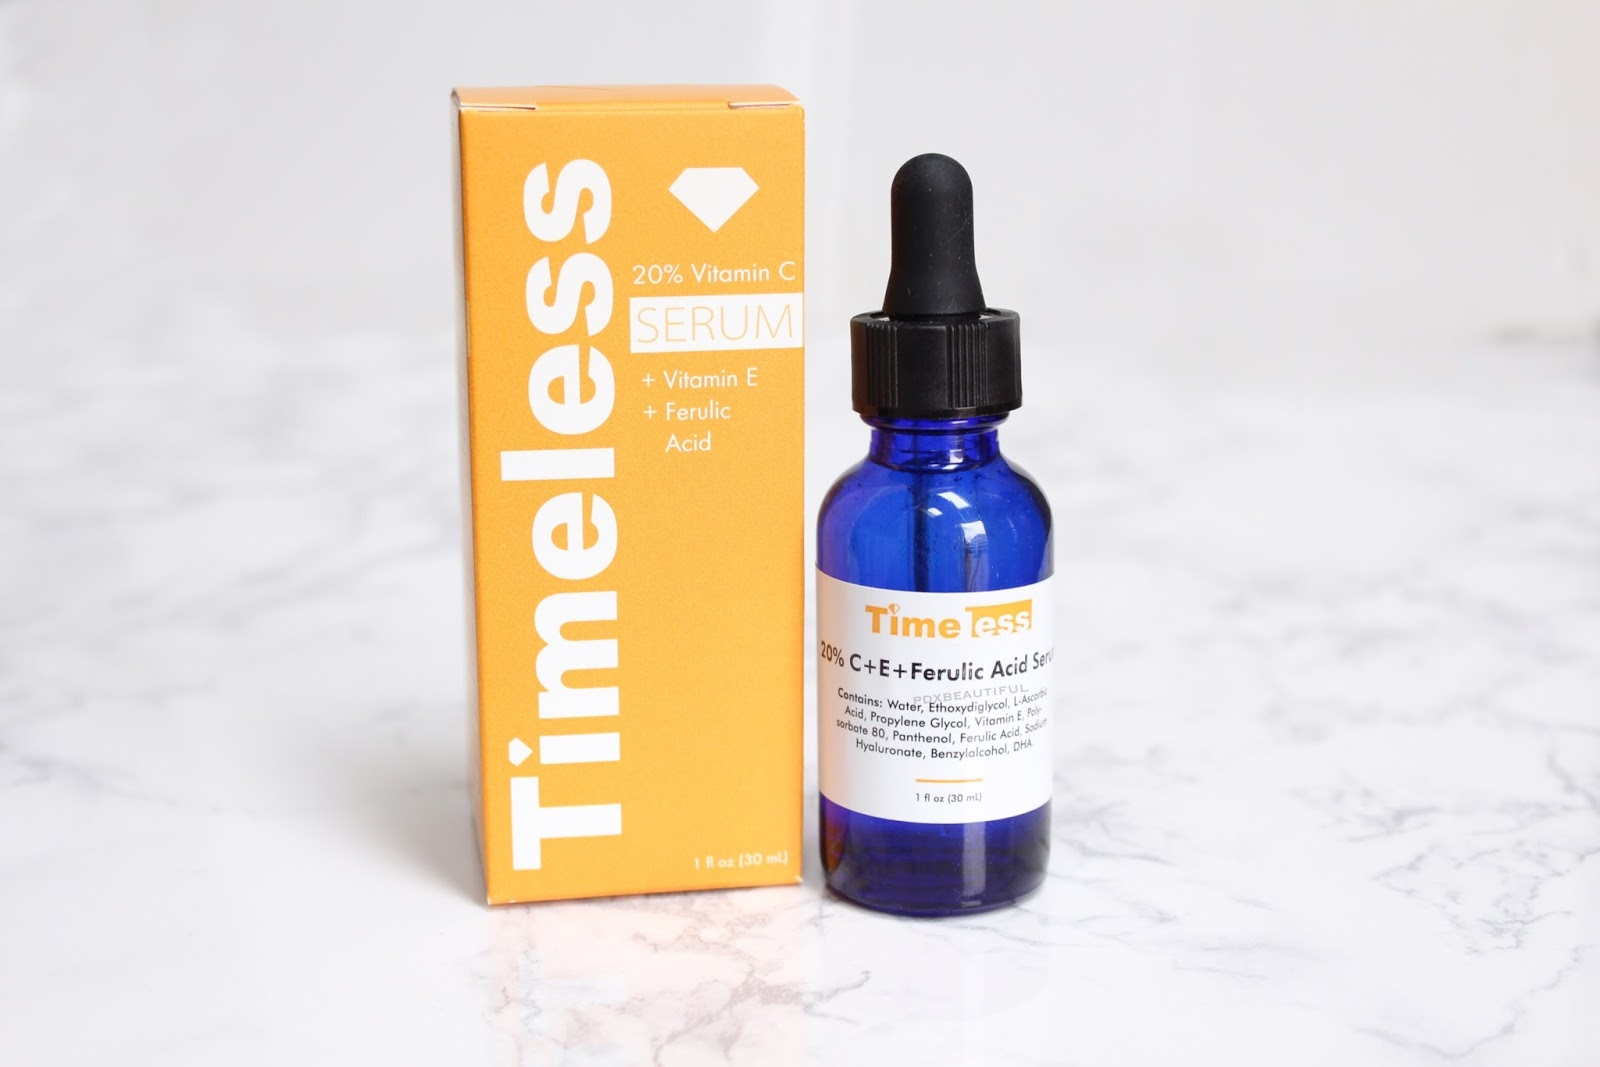 Timeless vitamin c serum: Price, Benefits, Ingredients, Review, How to Use?